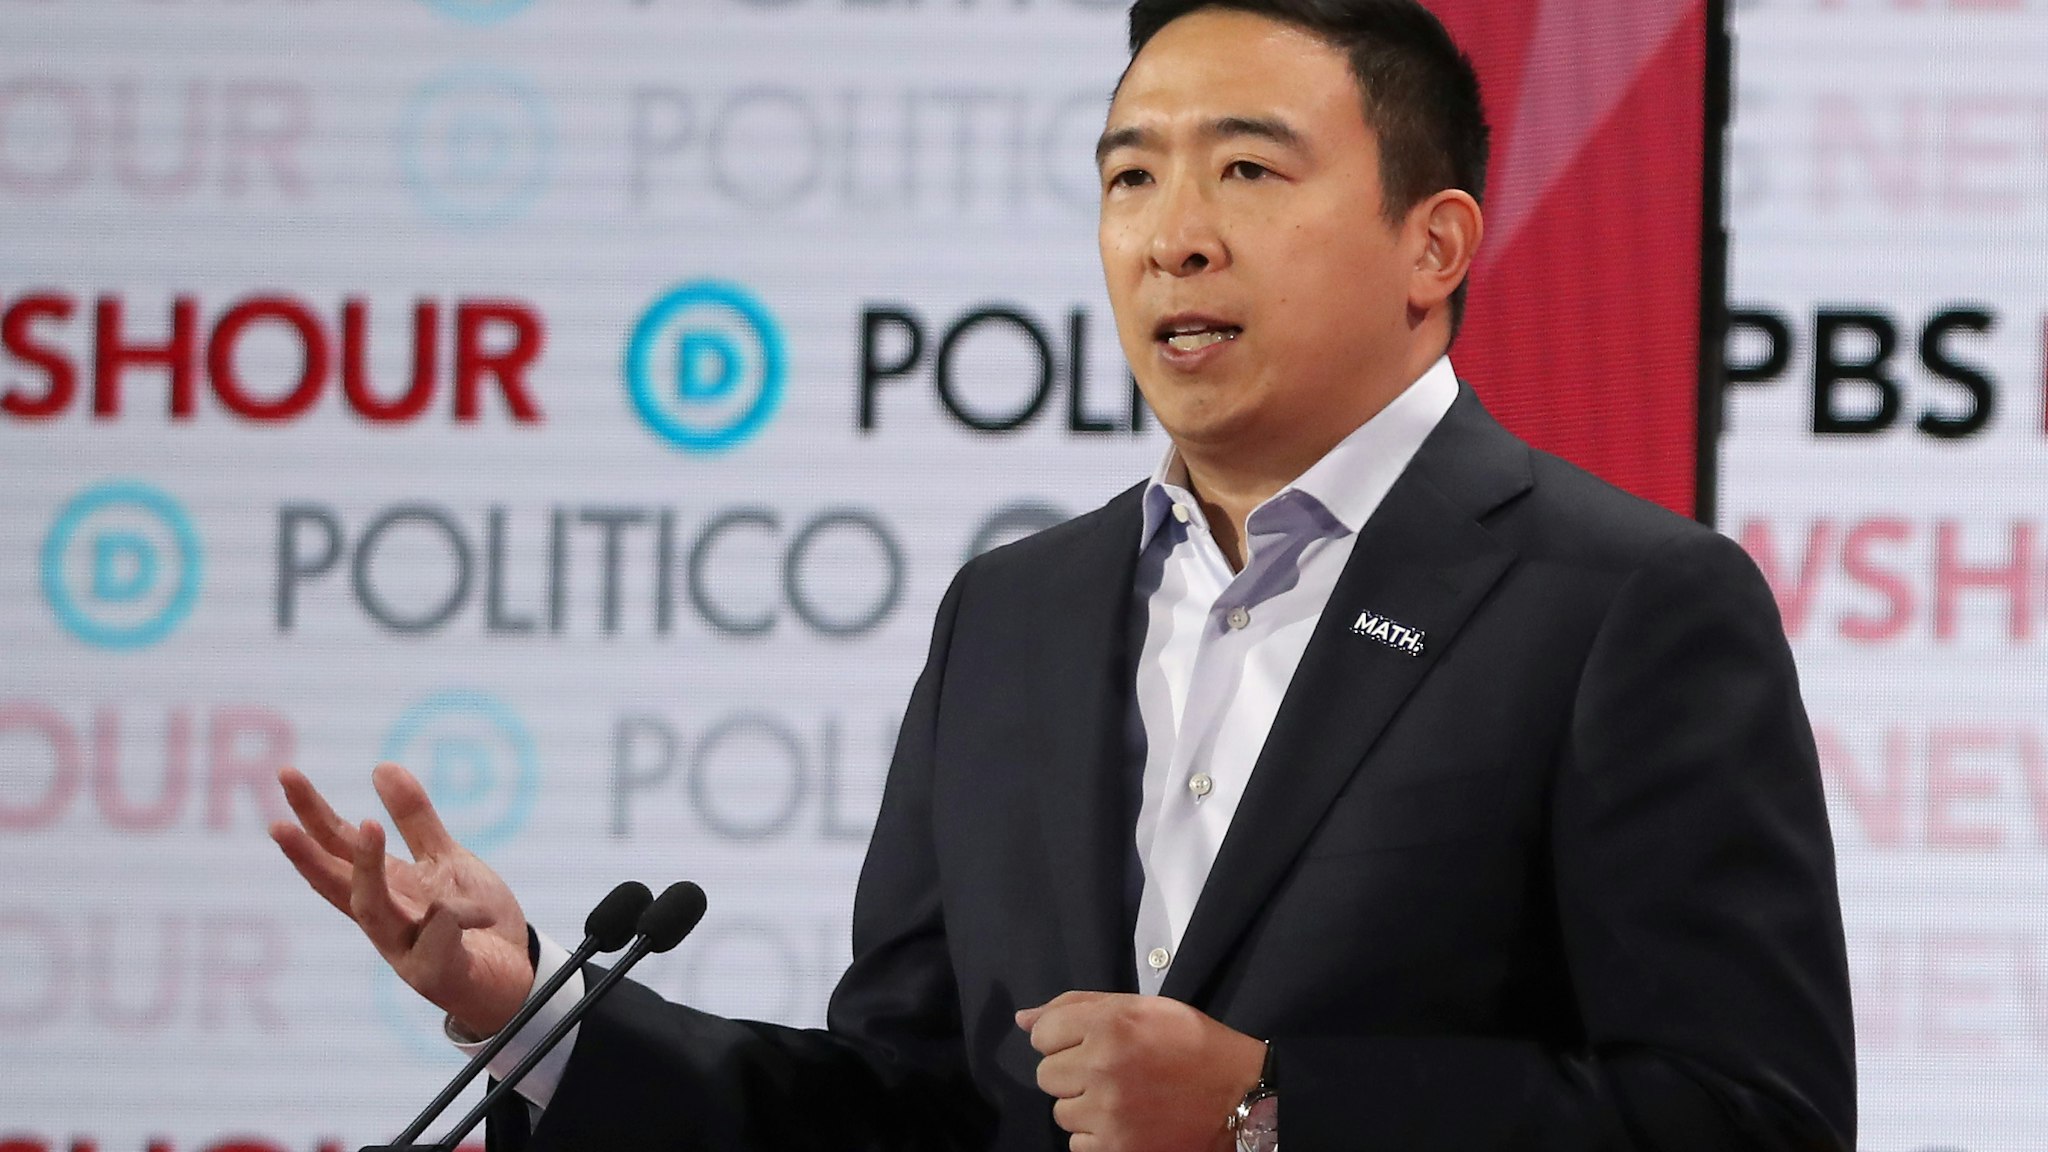 LOS ANGELES, CALIFORNIA - DECEMBER 19: Democratic presidential candidate former tech executive Andrew Yang speaks during the Democratic presidential primary debate at Loyola Marymount University on December 19, 2019 in Los Angeles, California. Seven candidates out of the crowded field qualified for the 6th and last Democratic presidential primary debate of 2019 hosted by PBS NewsHour and Politico. (Photo by Justin Sullivan/Getty Images)